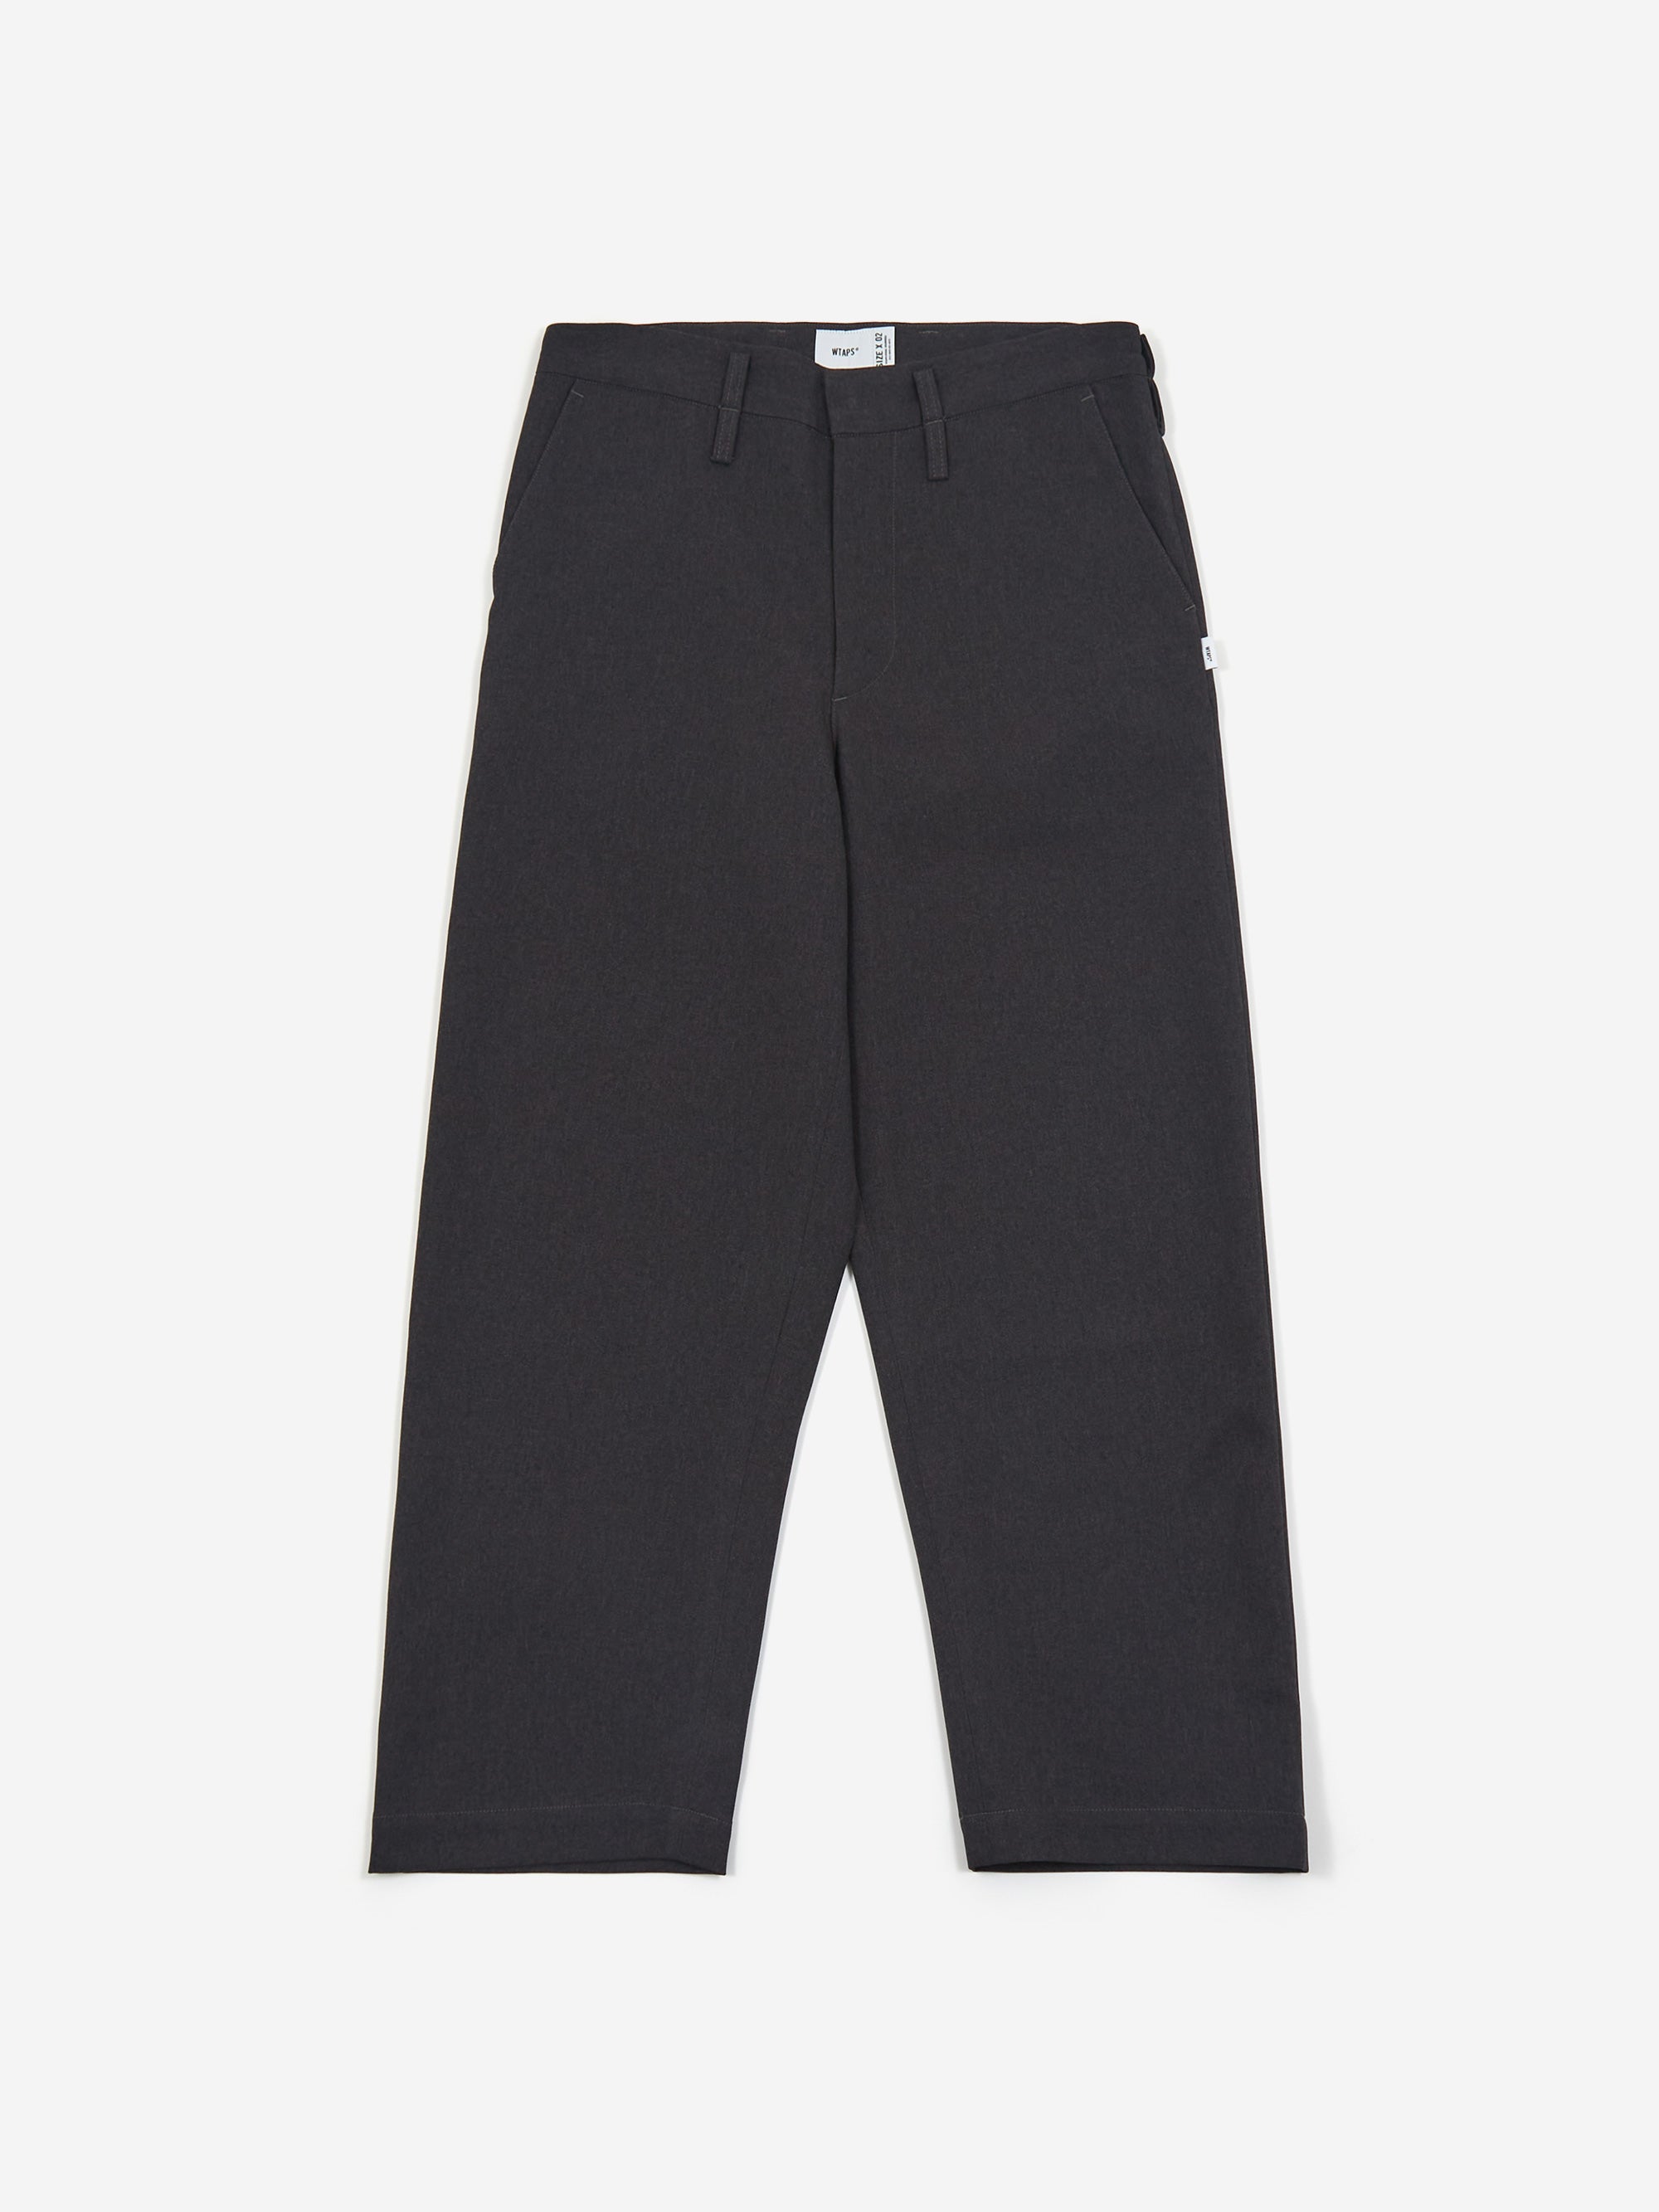 WTAPS Crease DL / Trousers / Poly. Twill - Charcoal